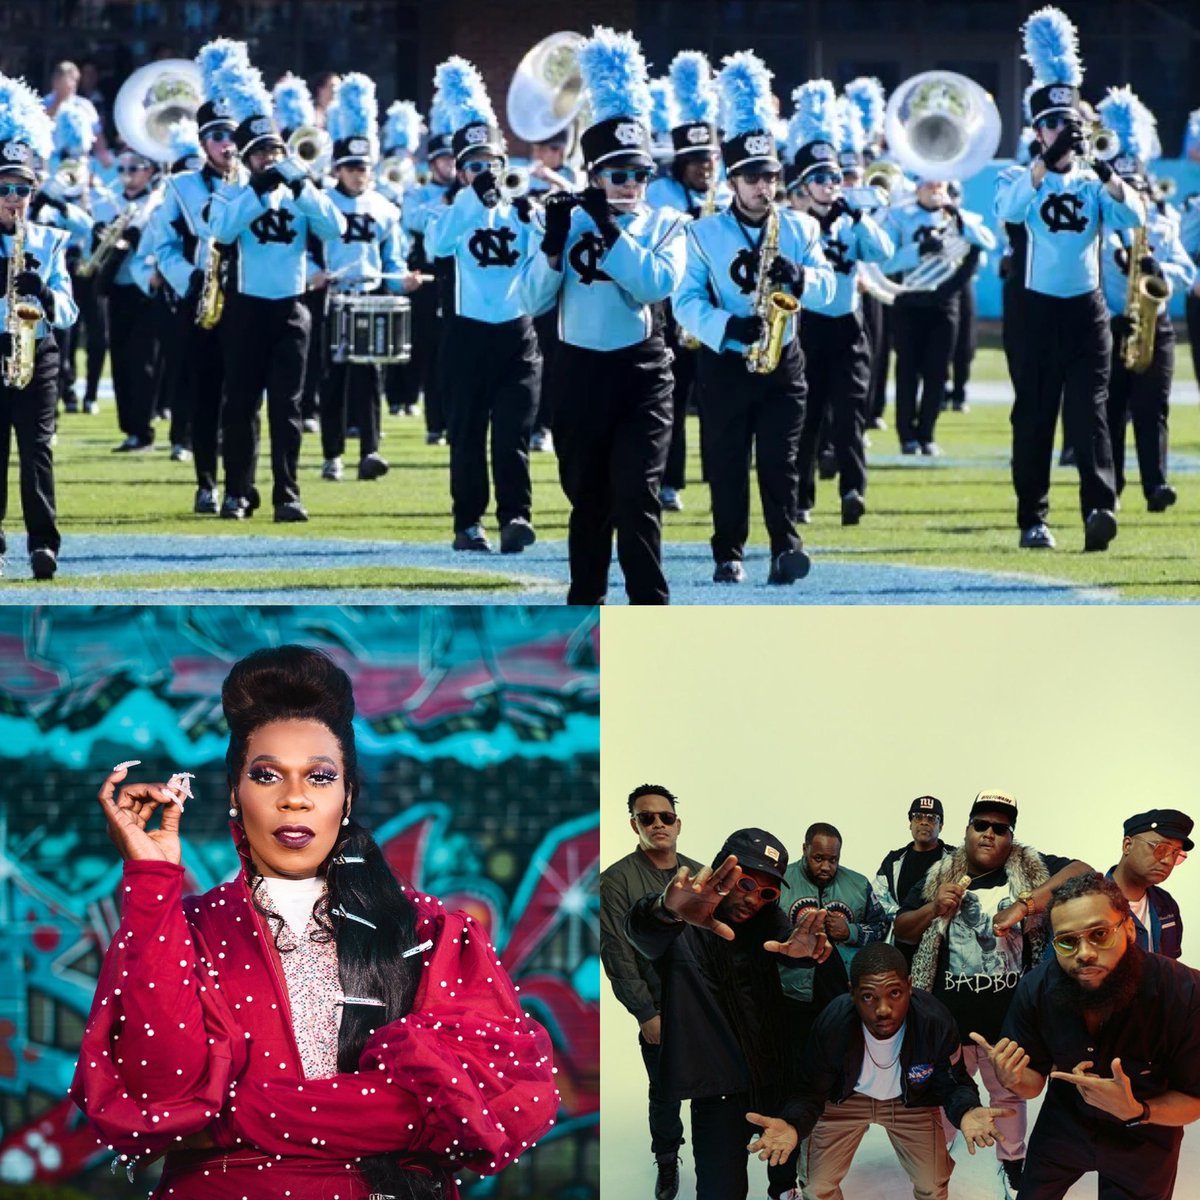 Another big collaboration tomorrow 😎

@SoulRebels x @bigfreedia x @UNC_Bands take the field together at halftime 🎶🙌